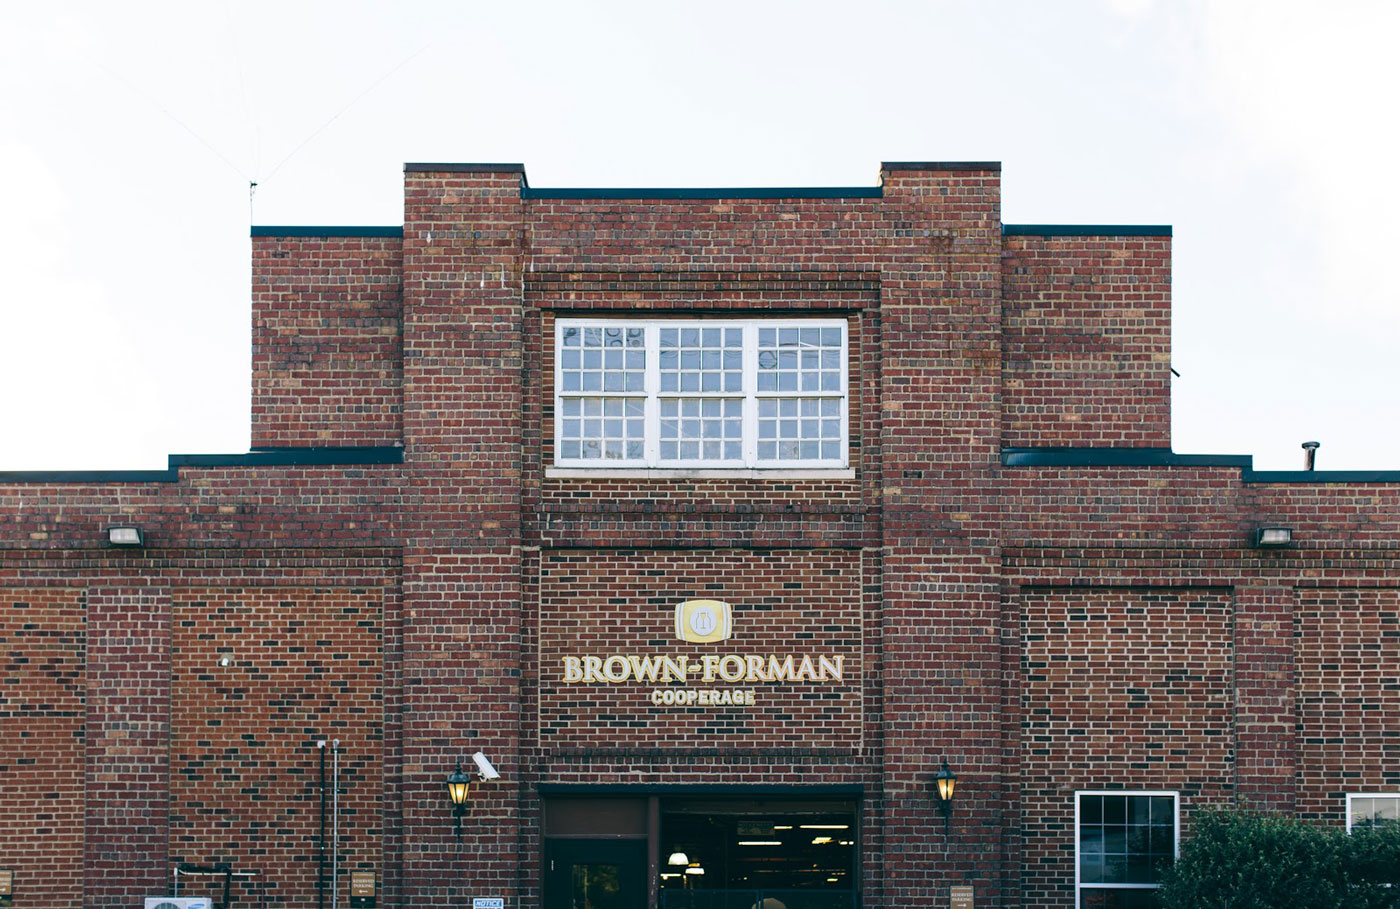 photo of brick building with Brown-Forman Cooperage logo sign